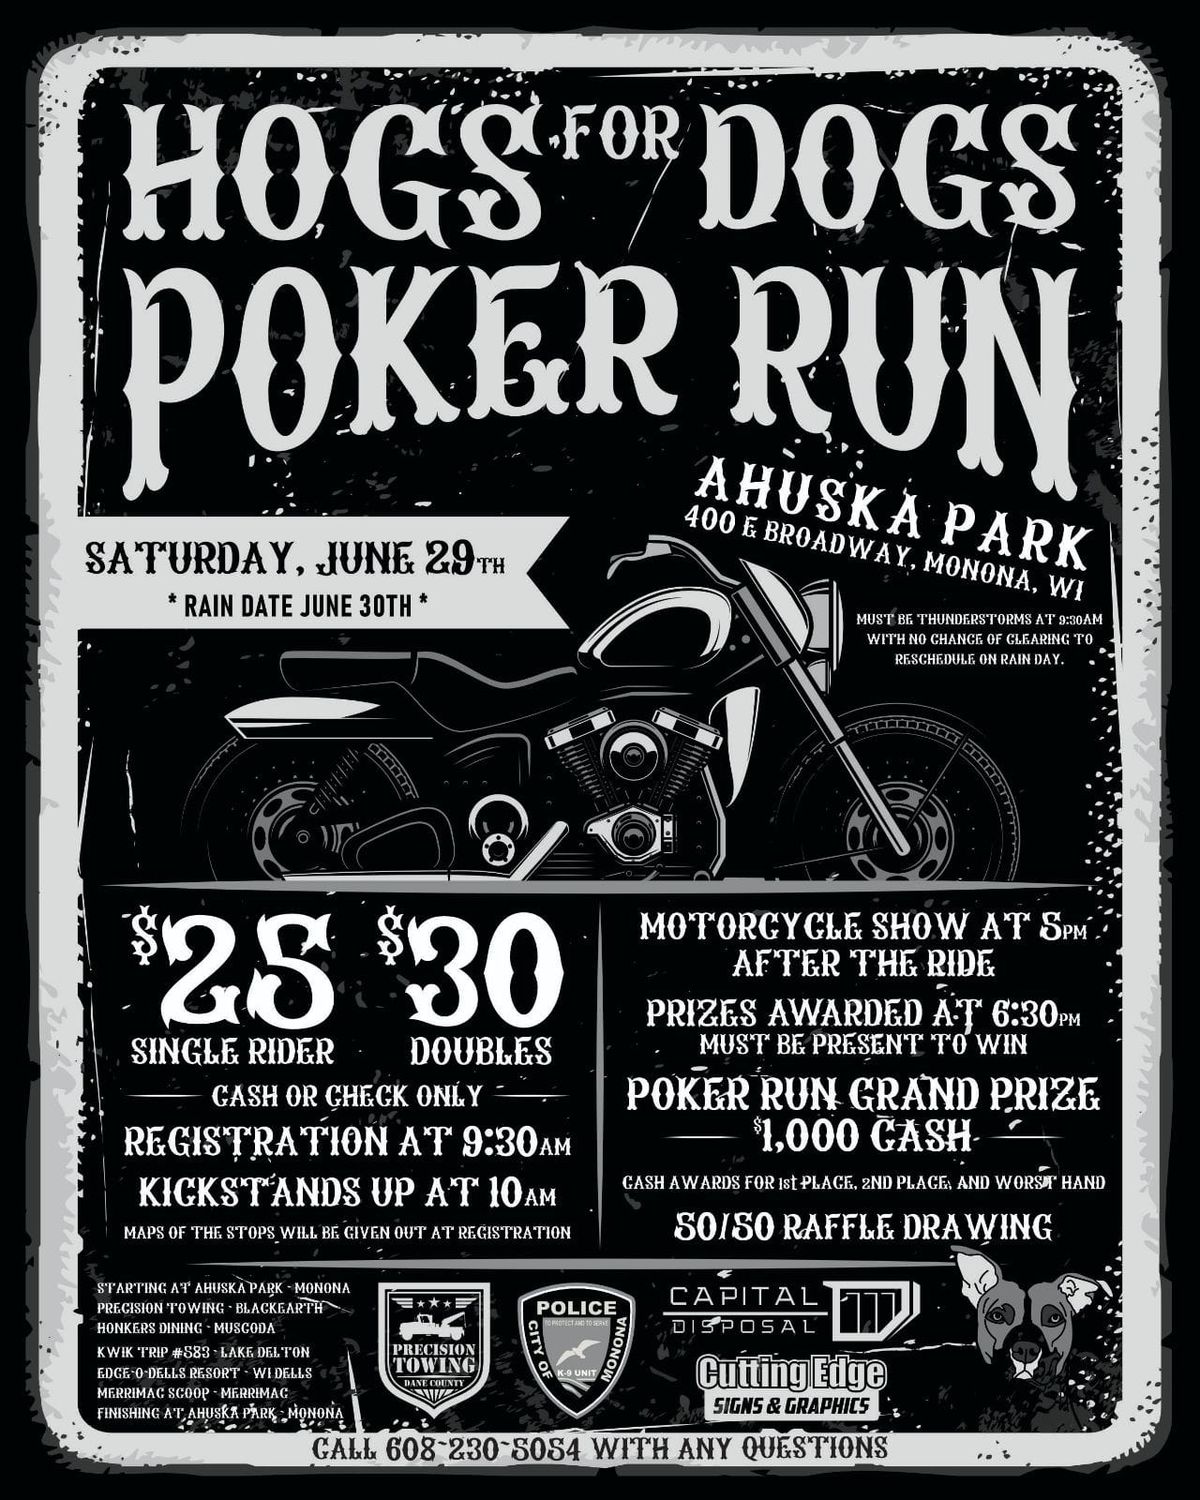 Hogs for Dogs "Poker Run" $1,000 Grand Prize